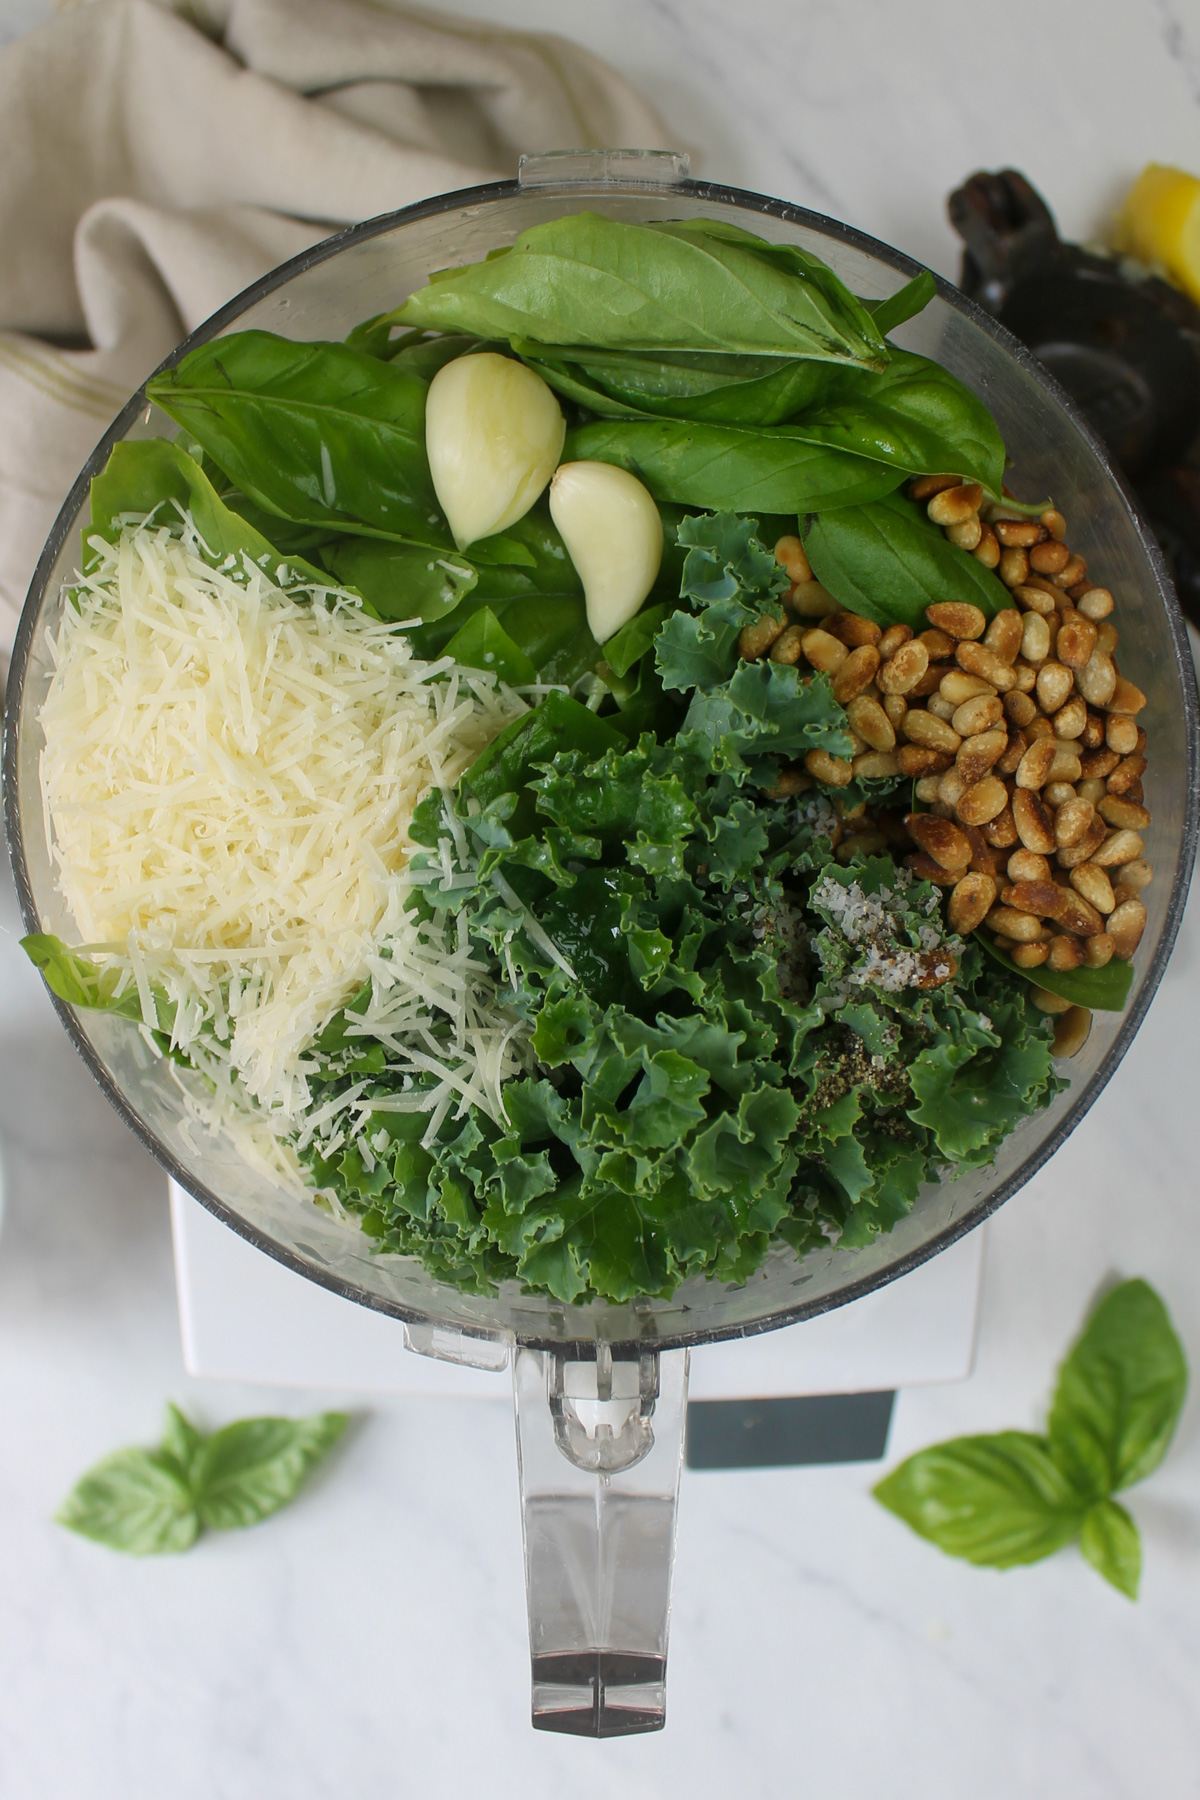 Pesto ingredients in the food processor ready to puree.